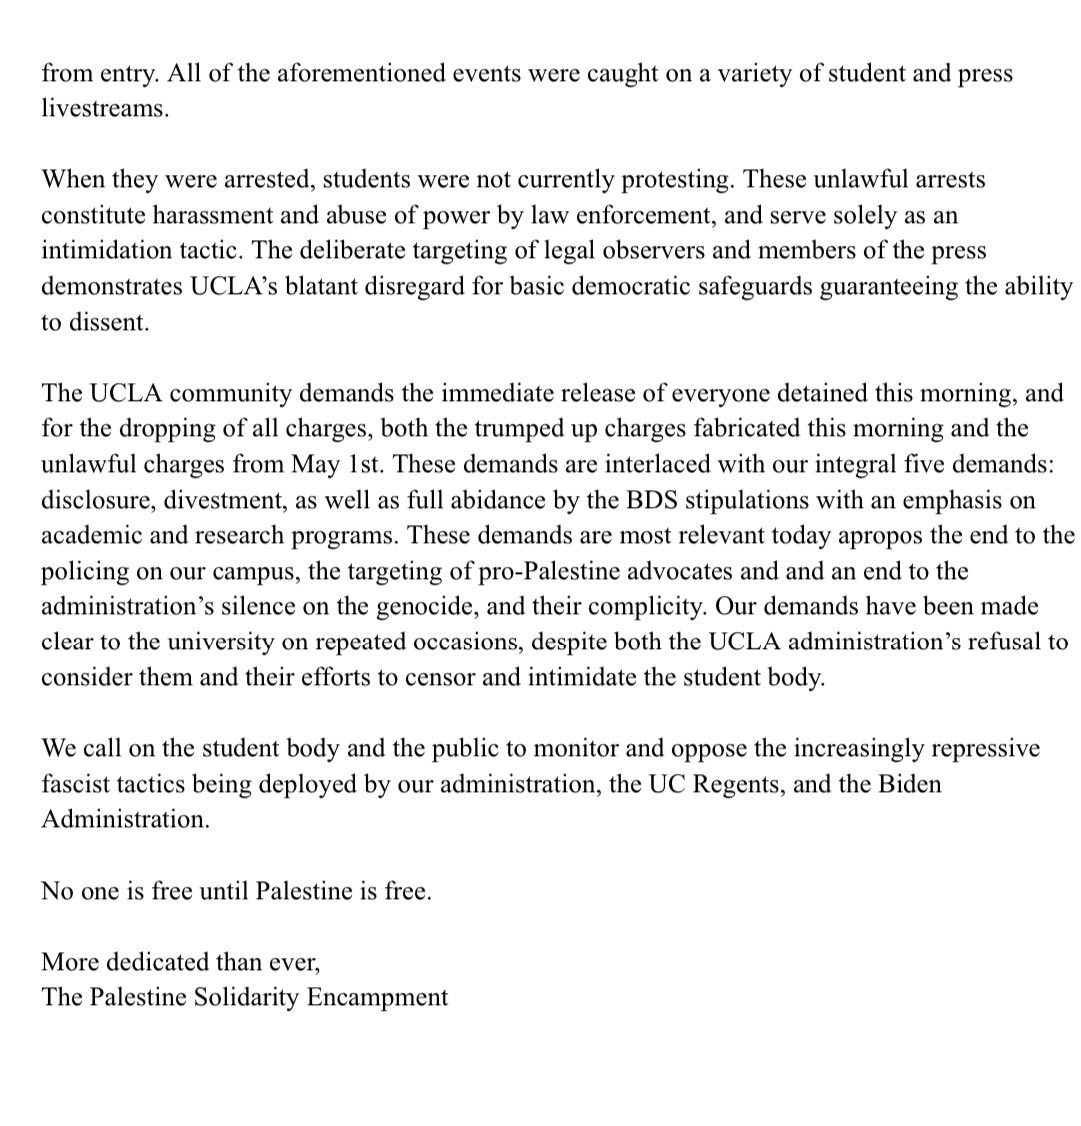 STATEMENT FROM UCLA PALESTINE SOLIDARITY ENCAMPMENT “We call on the student body and the public to monitor and oppose the increasingly repressive fascist tactics being deployed by our administration, the UC Regents, and the Biden Admin. No one is free until Palestine is free.”